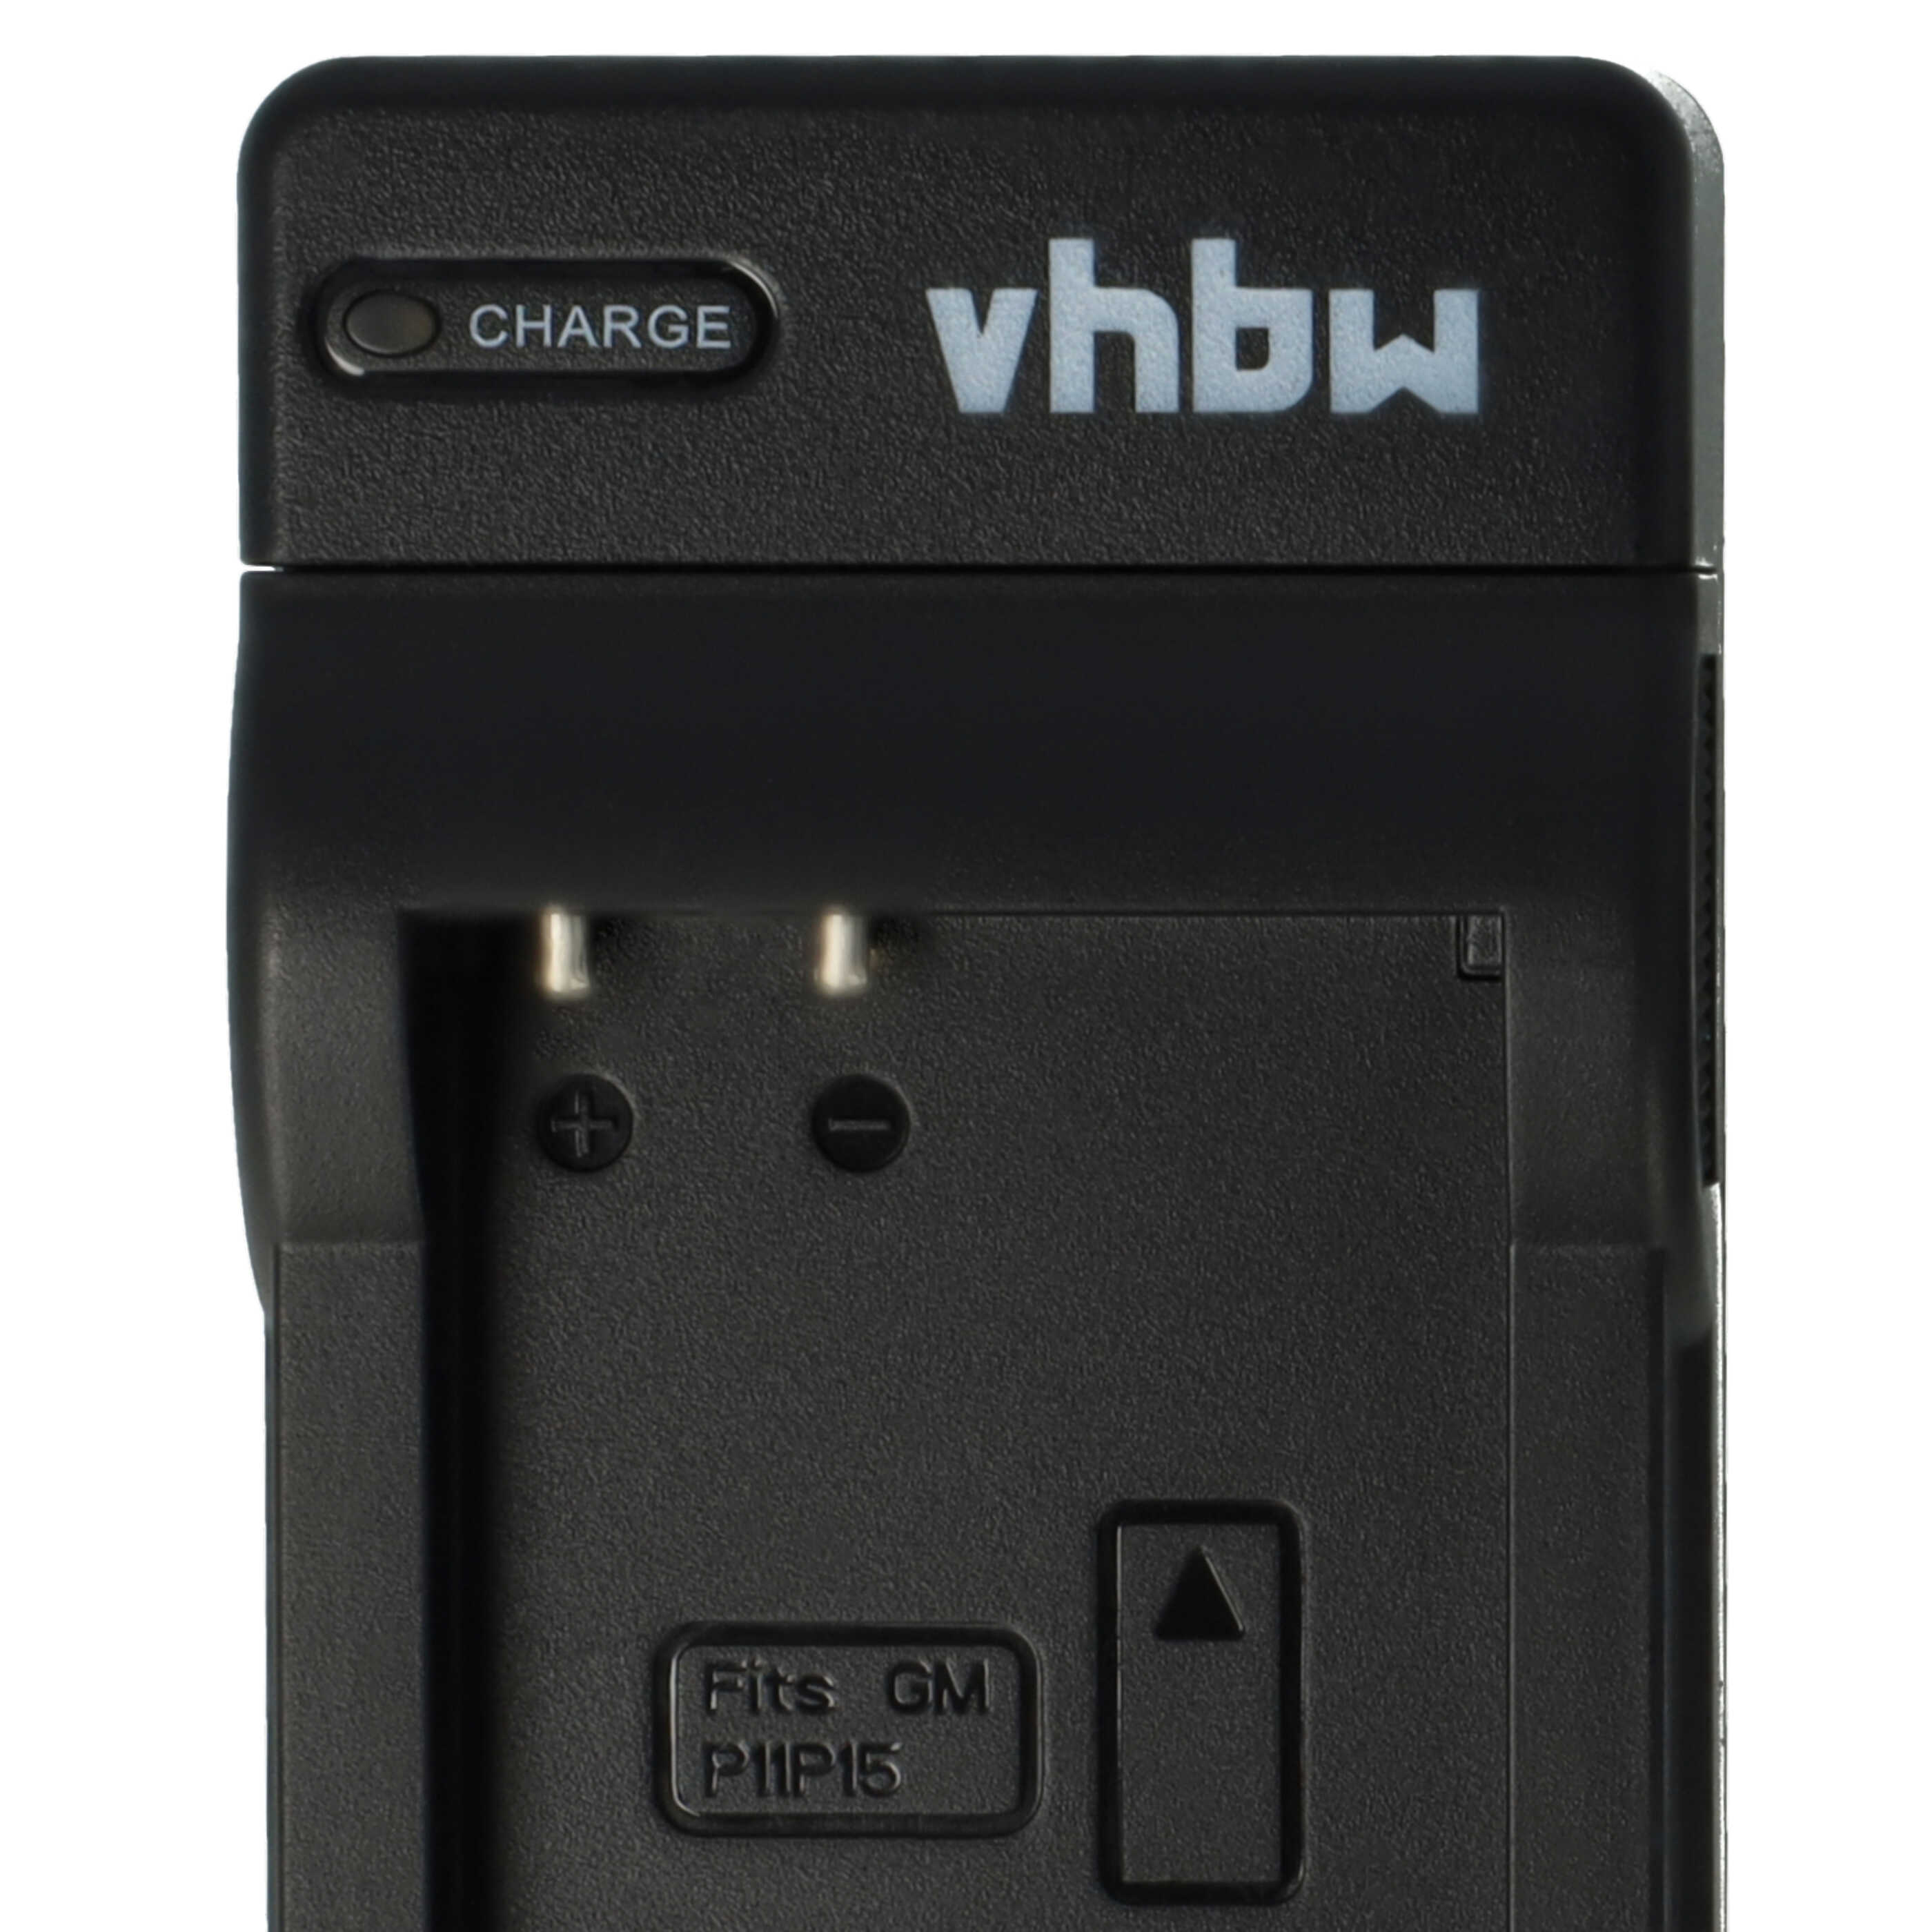 Battery Charger suitable for E1GR Camera etc. - 0.5 A, 4.2 V